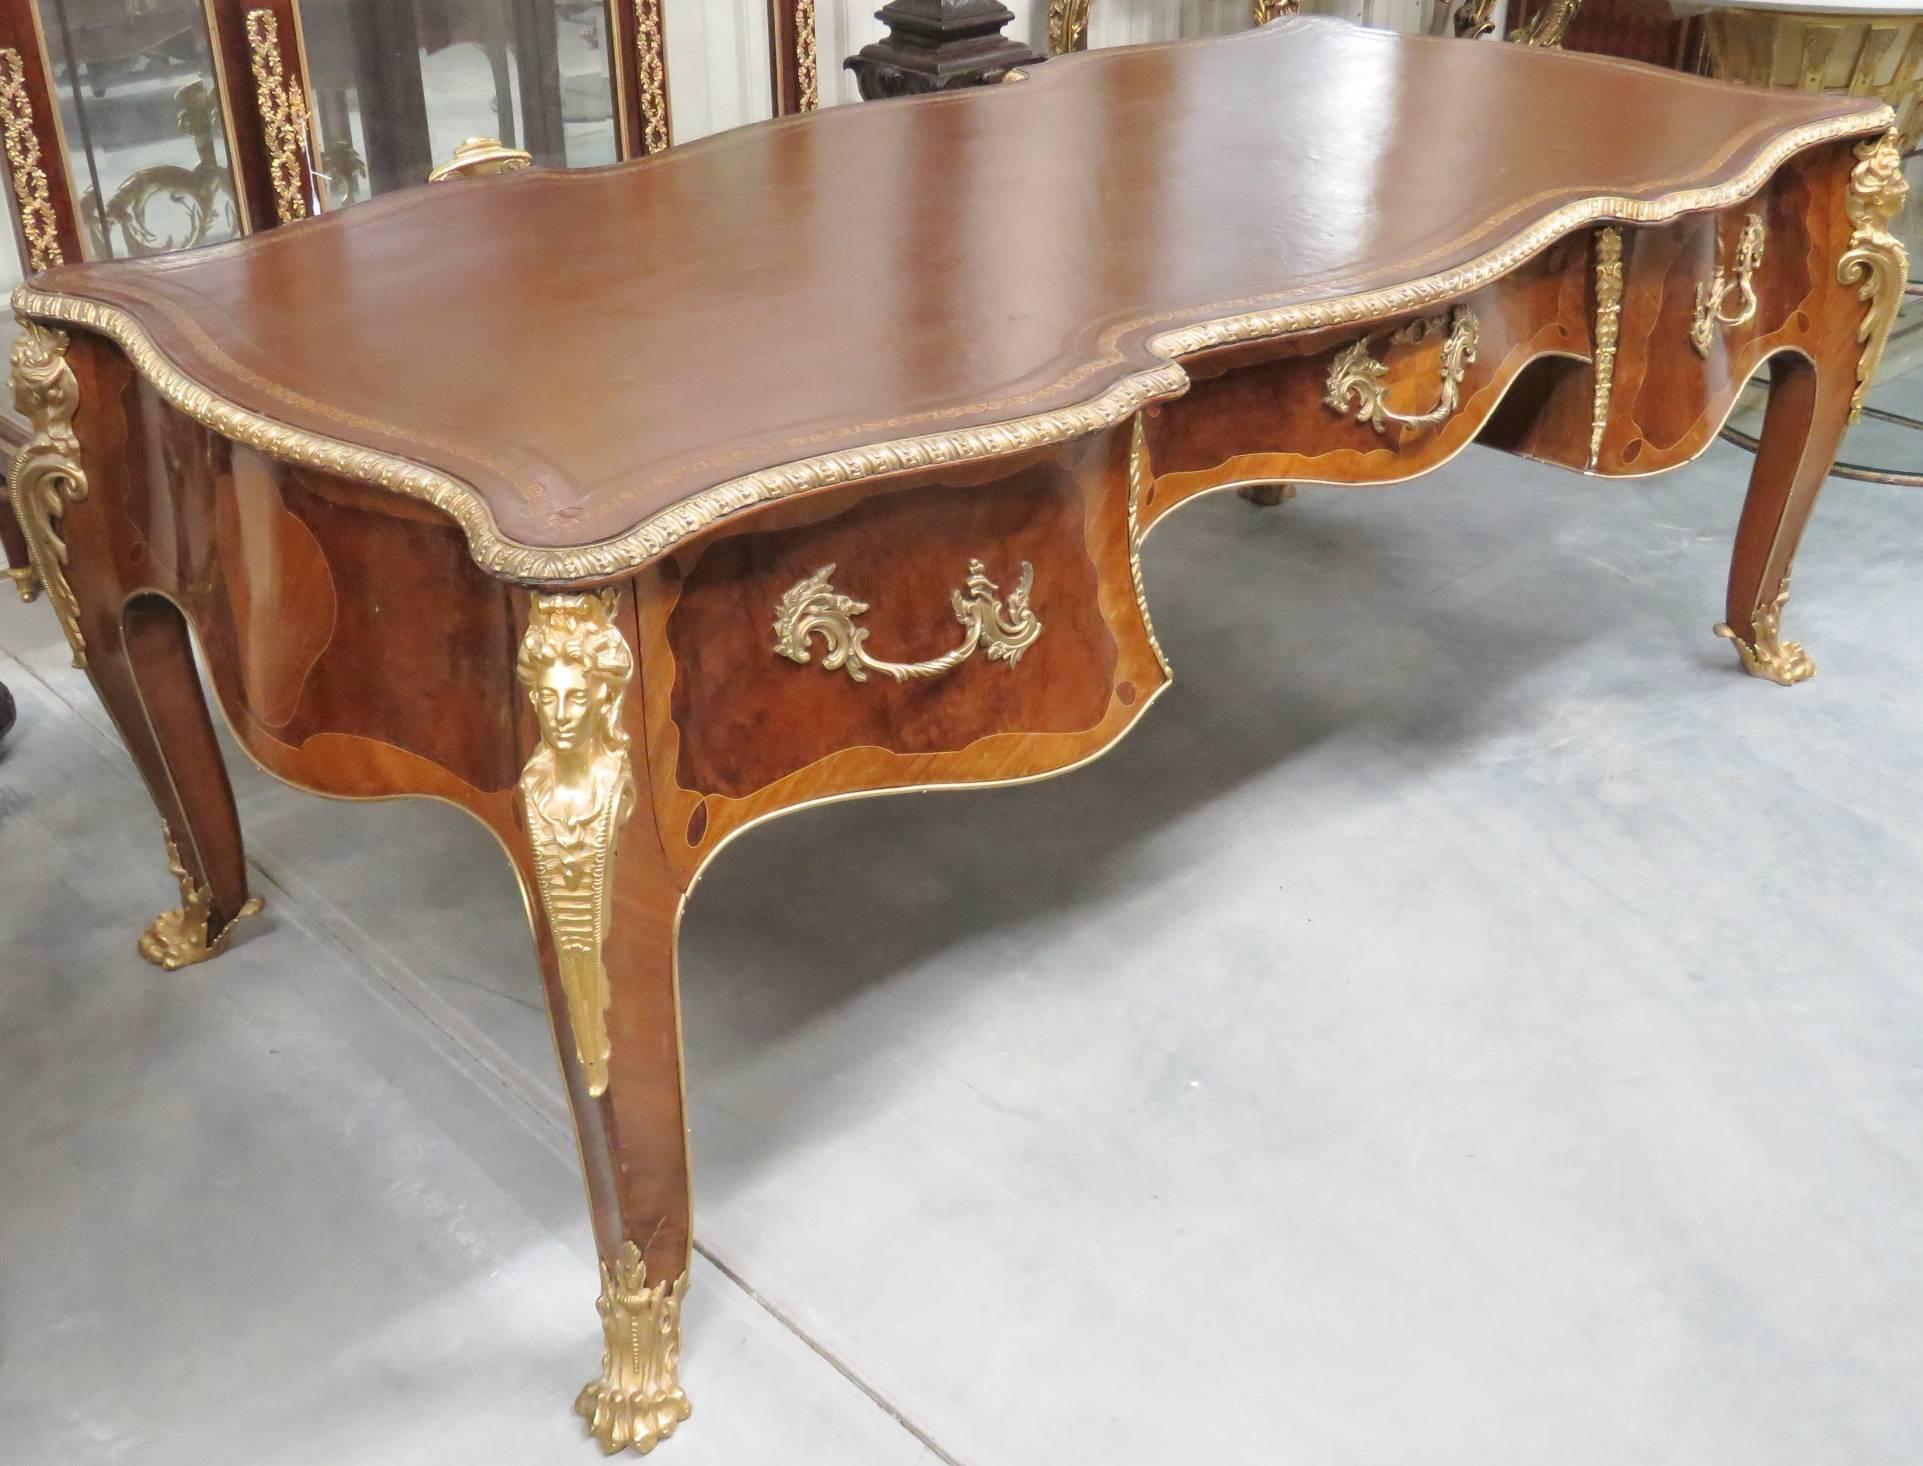 Early 20th Century 19th Century Leather Top Figural Inlaid Desk